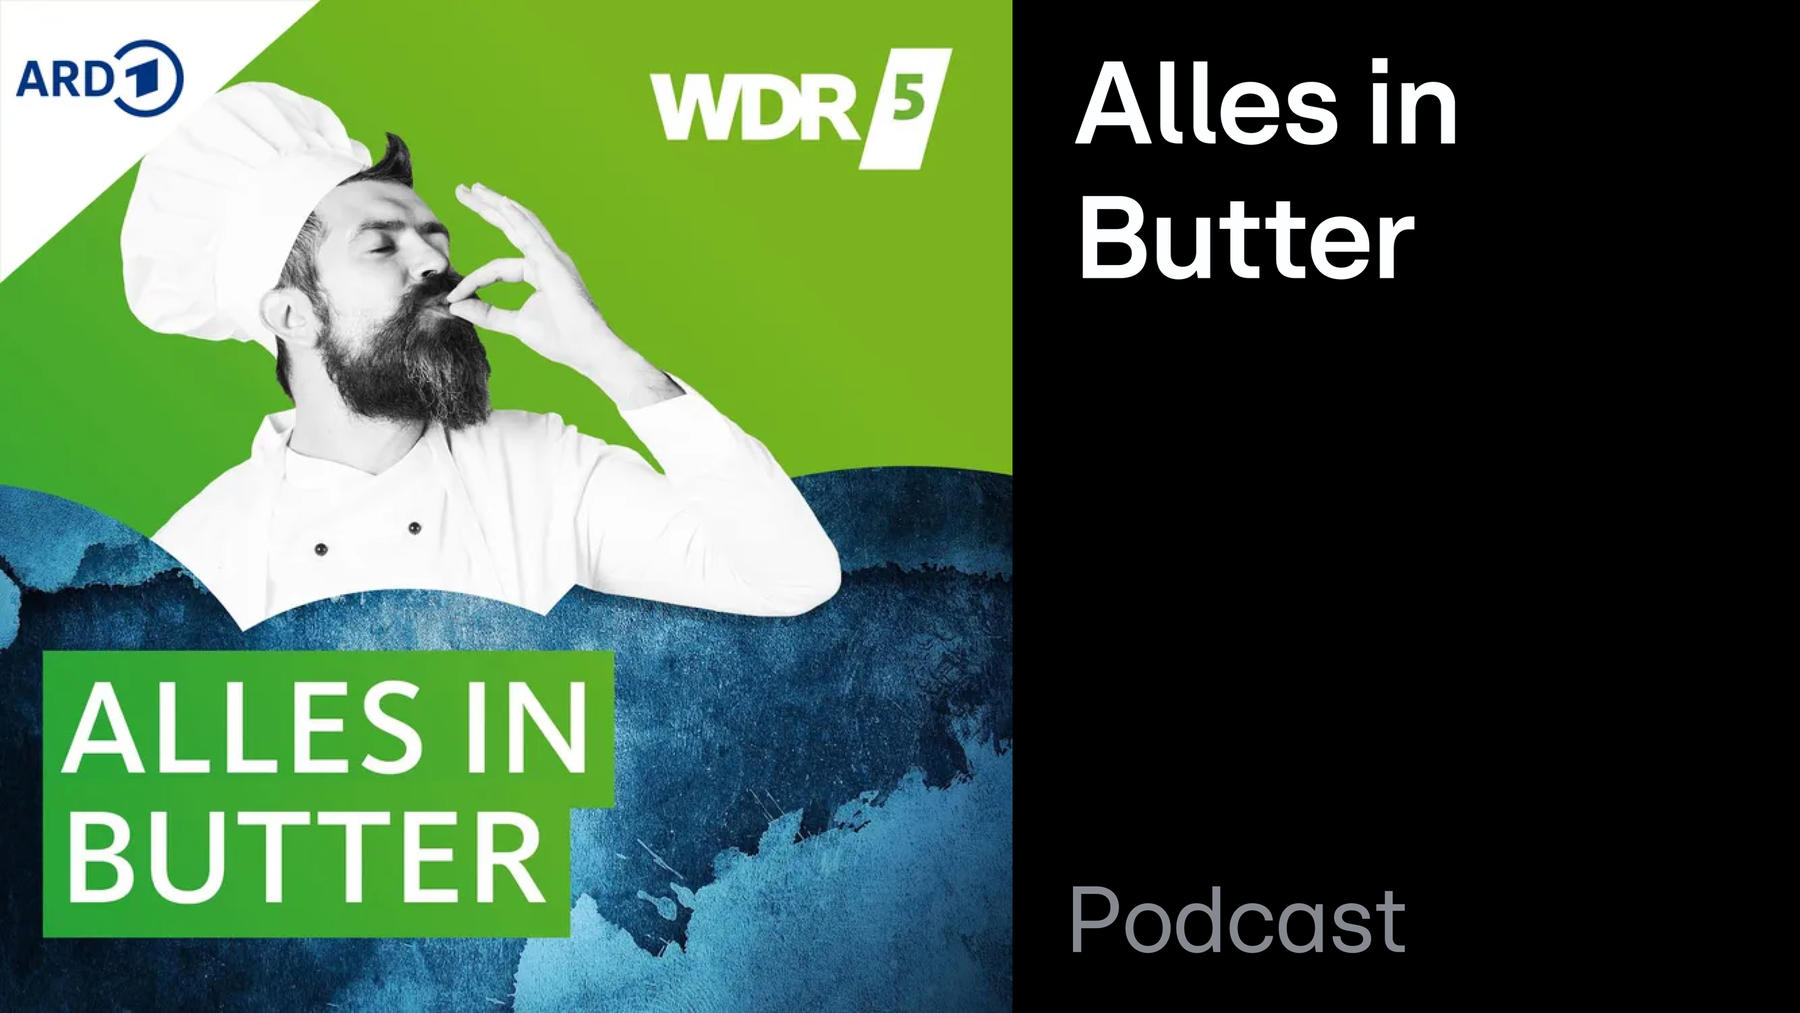 Podcast: Alles in Butter